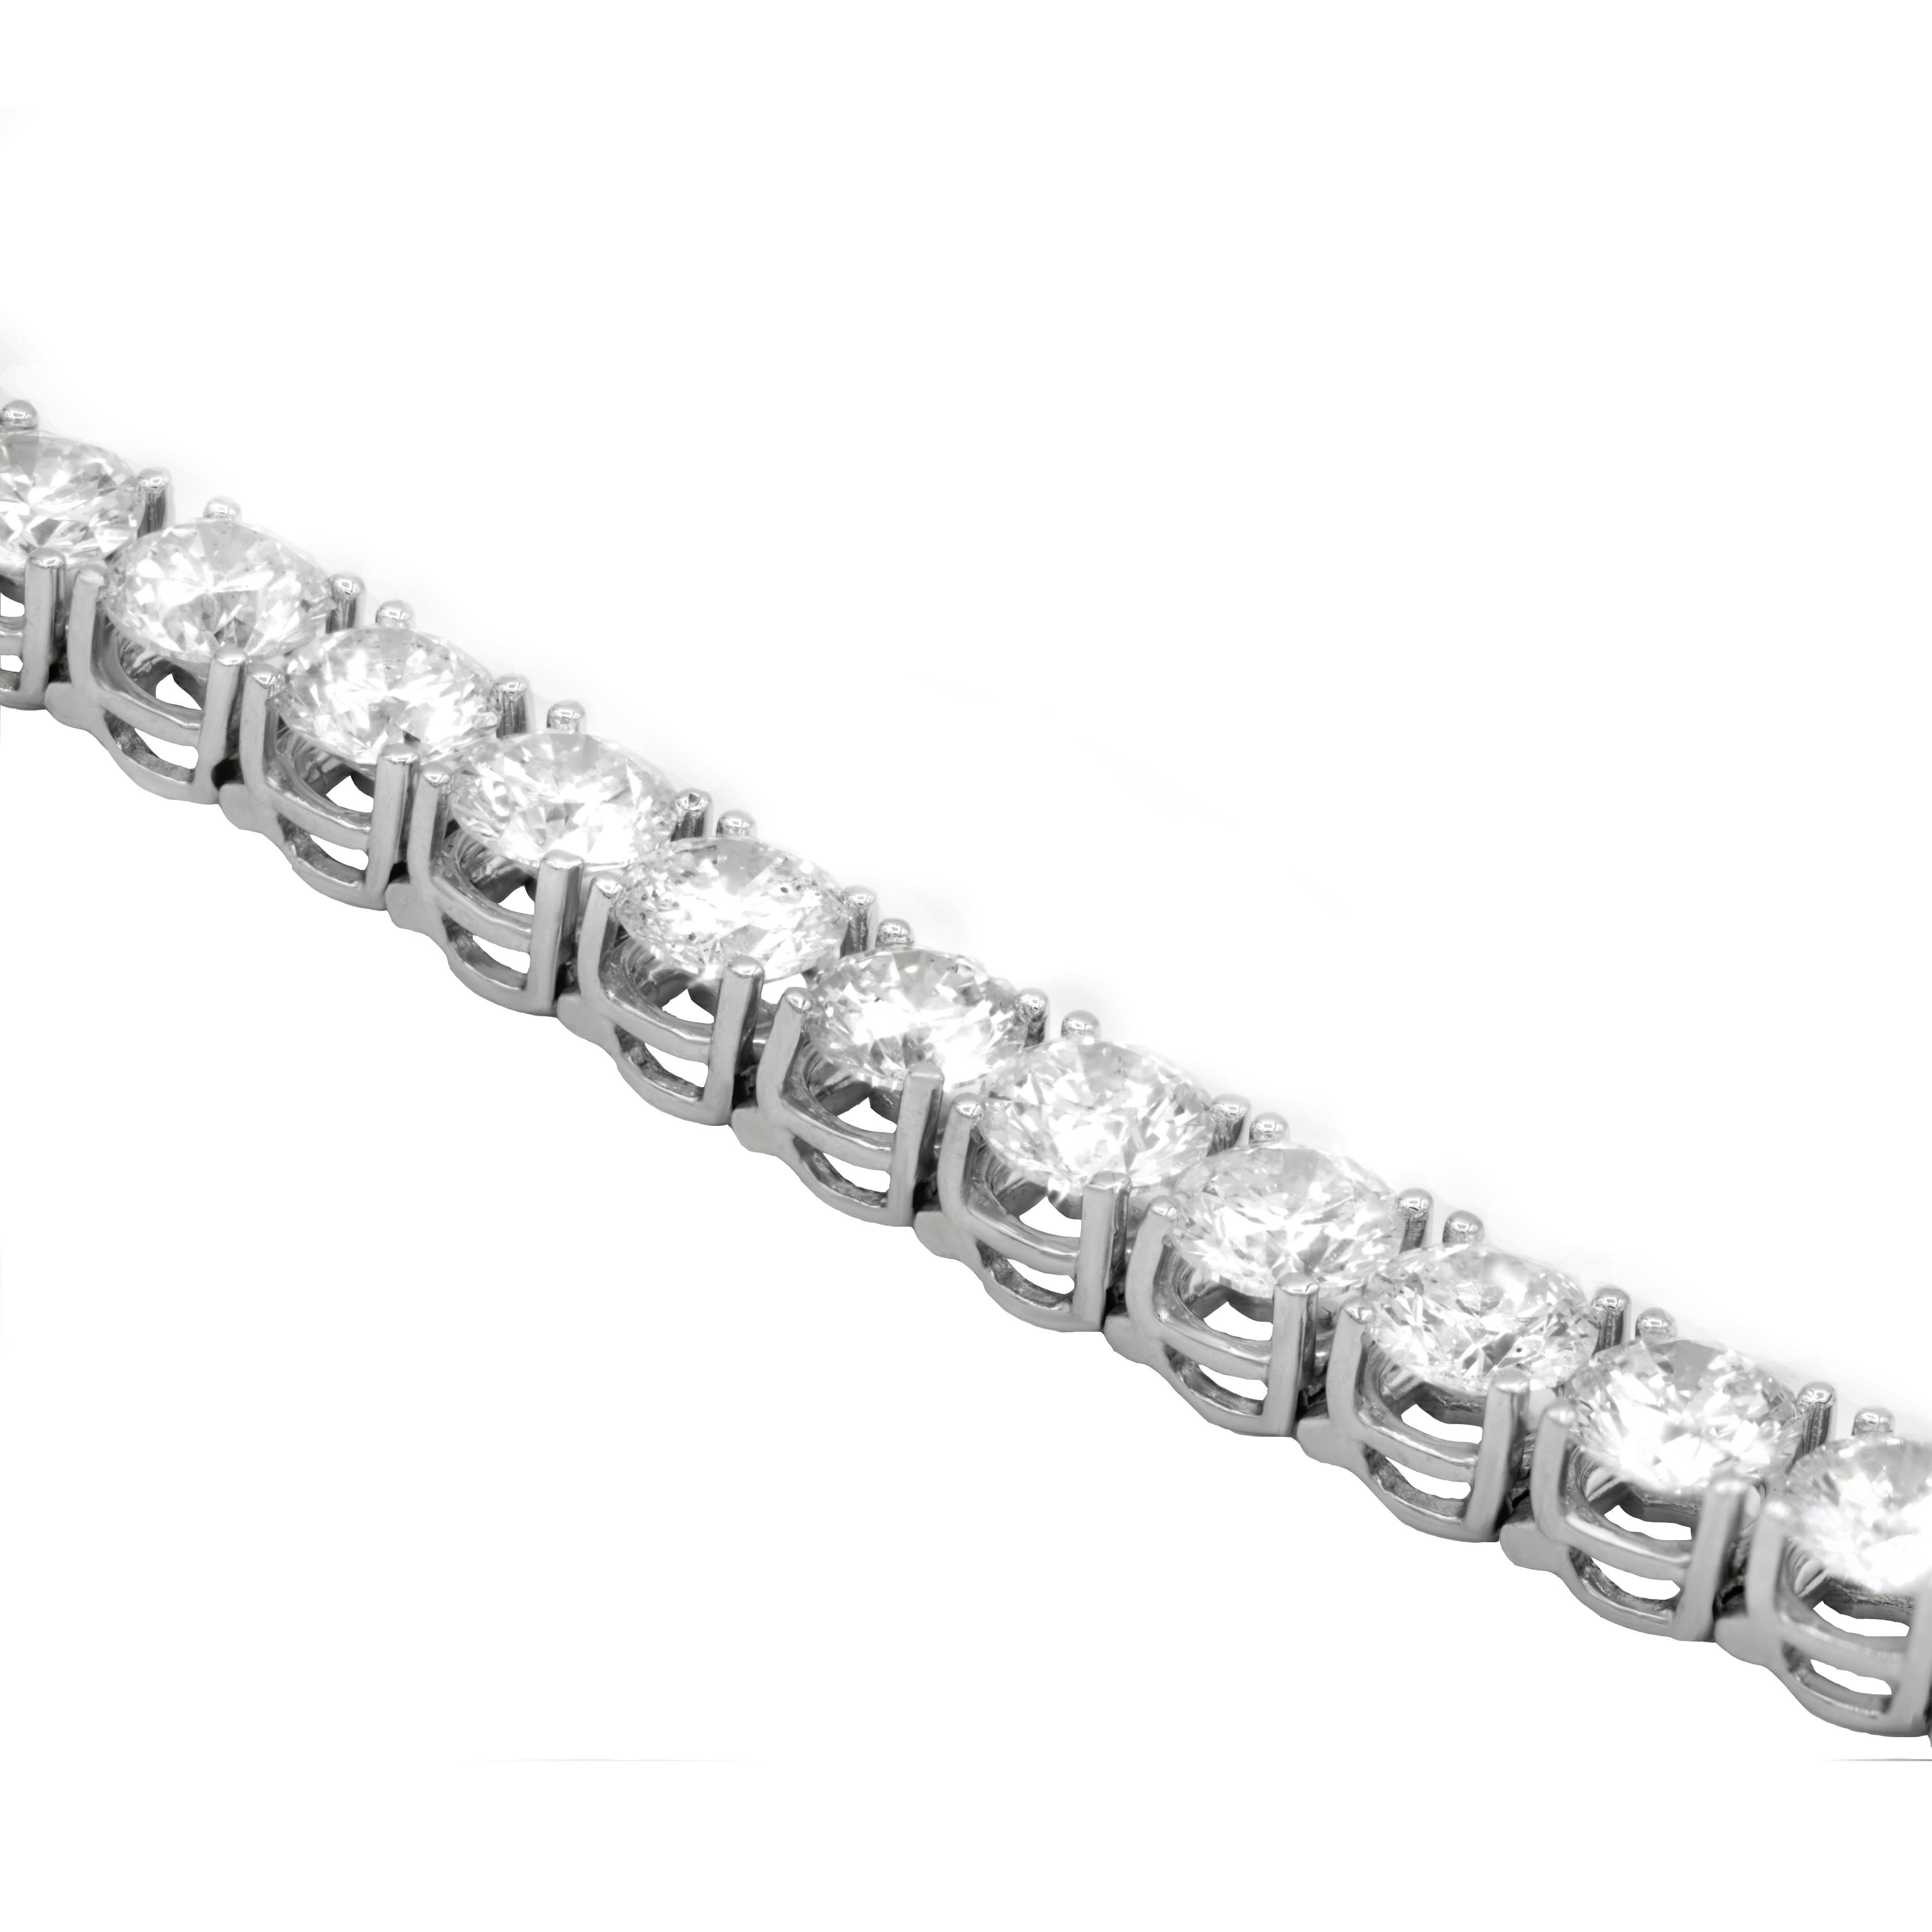 This important diamond tennis bracelet features 15.00 Carats of round brilliant cut diamonds. Each stone is approximately 0.44 Carats. 34 stones in total. Accompanied by Certificate. Ideal cut diamonds 

Each stone is top color and clarity. H-I SI